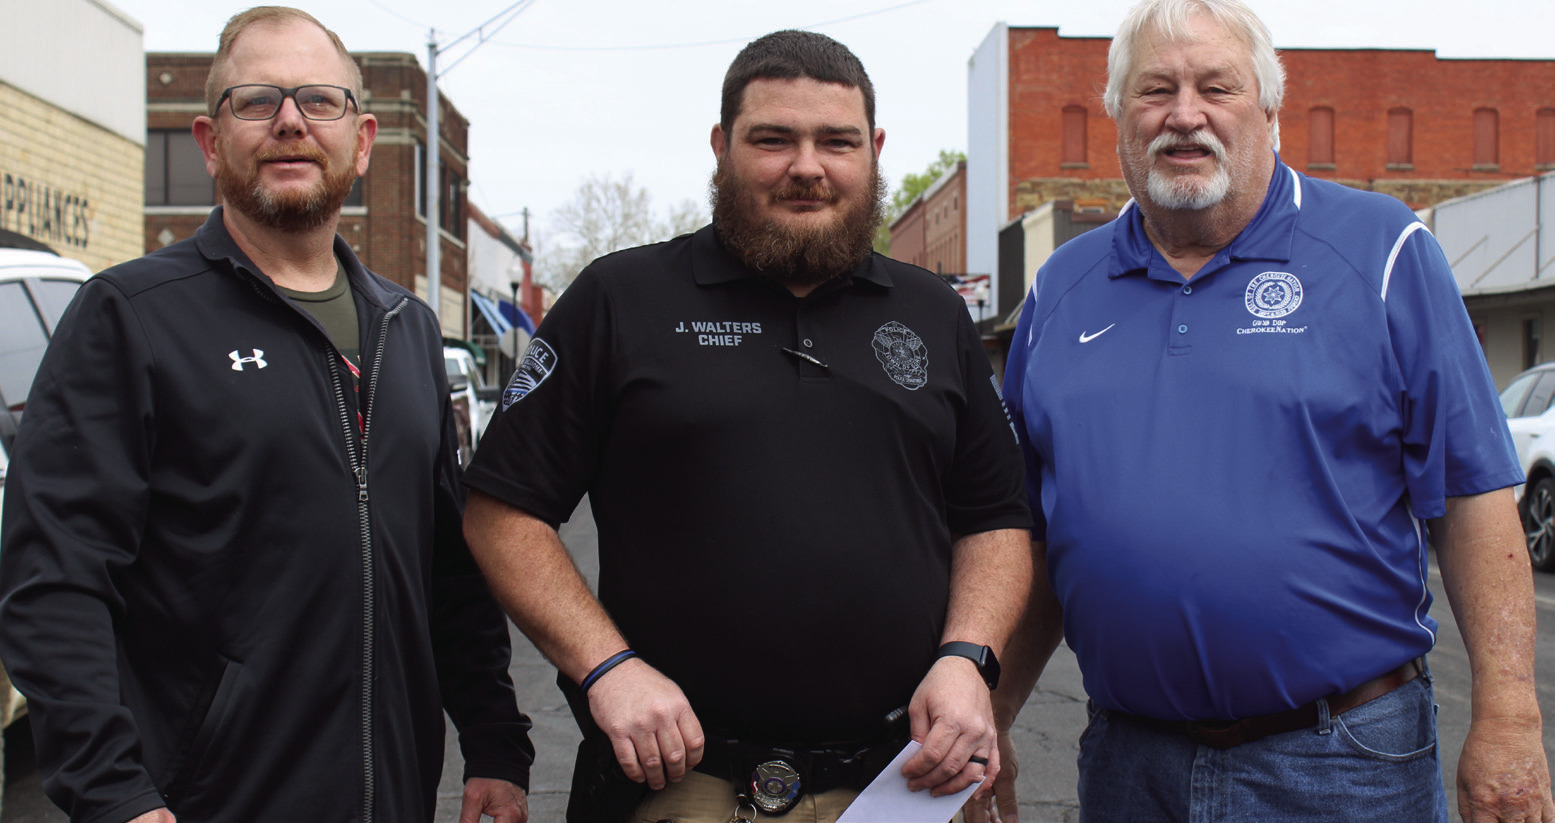 Gore Police Chief Jeremy Walters (center) receives a check for $10,000 from Cherokee Nation Dist. 6 Councilman Daryl Legg (left) and Dist. 5 Councilman E.O. Smith Jr. (right).